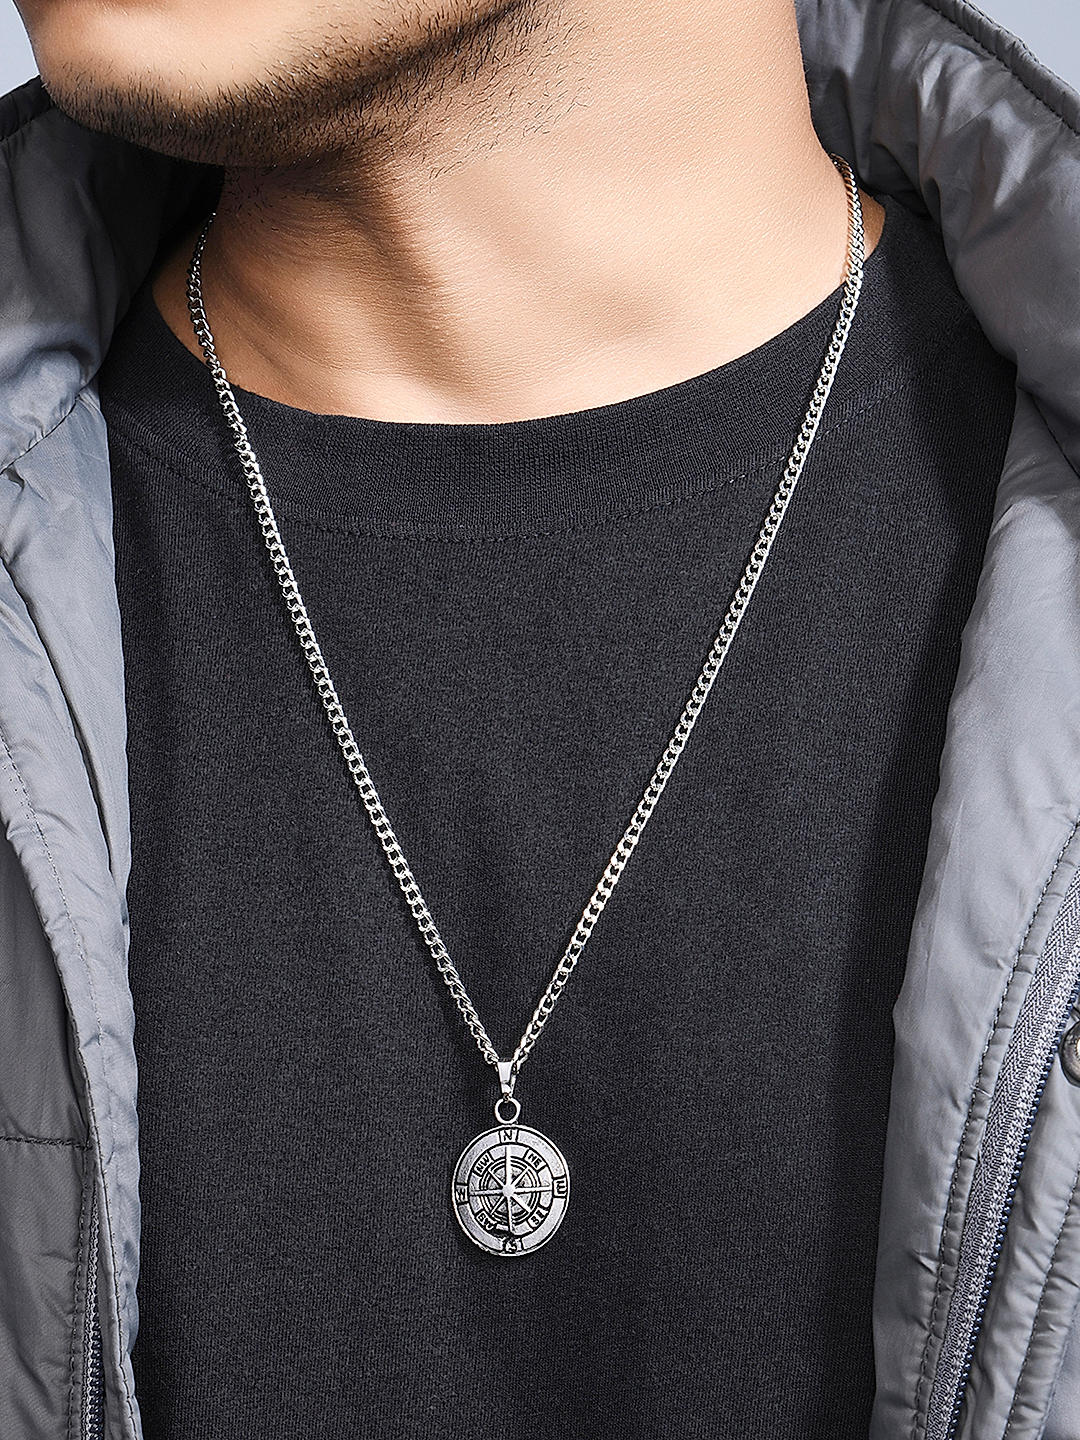 Planet '79 New and Improved! 18k Gold Compass North Star Pendant Chain Mens  Compass Necklace Gold Anchor Pendant Vintage Necklace For Men Boyfriend  Gift Girlfriend Gift | Amazon.com